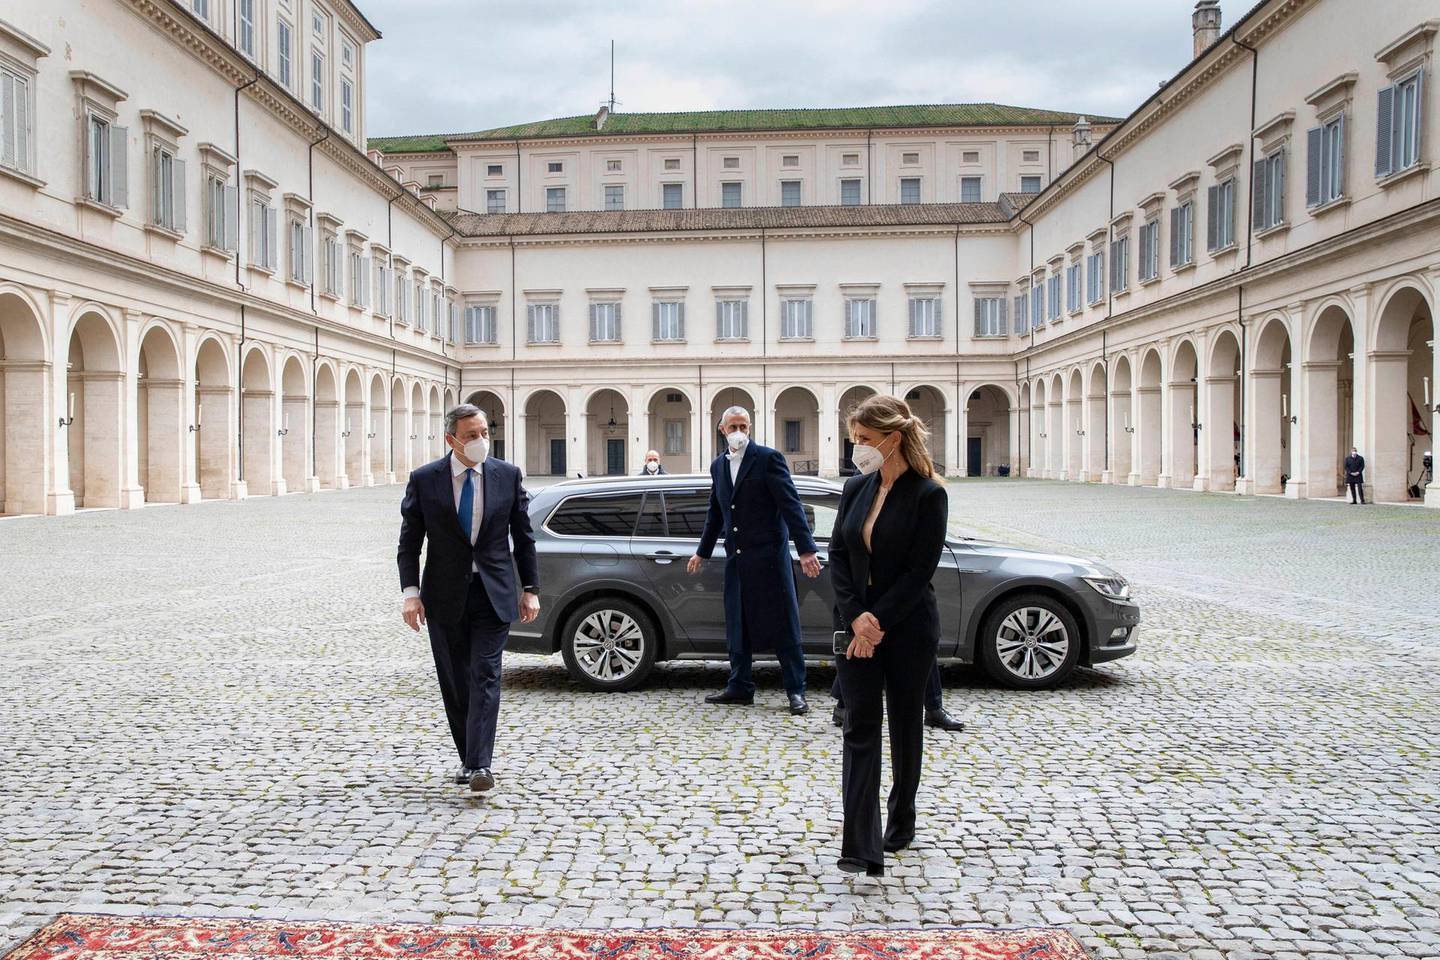 epa08983895 A handout photo made available by the press office of the Quirinal Palace (Palazzo Quirinale) shows former president of the European Central Bank (ECB) Mario Draghi (L) arriving at the Quirinal Palace for a meeting with the Italian president, in Rome, Italy, 03 February 2021. President Mattarella has summoned Draghi for a meeting seeking for a 'high-profile' government. Mattarella, who said he was left with two choices, either calling snap elections or nominating a technical government, made the announcement after the ruling coalition failed to form a majority following Giuseppe Conte's resignation as prime minister.  EPA/FRANCESCO AMMENDOLA/QUIRINAL PALACE PRESS OFFICE HANDOUT  HANDOUT EDITORIAL USE ONLY/NO SALES